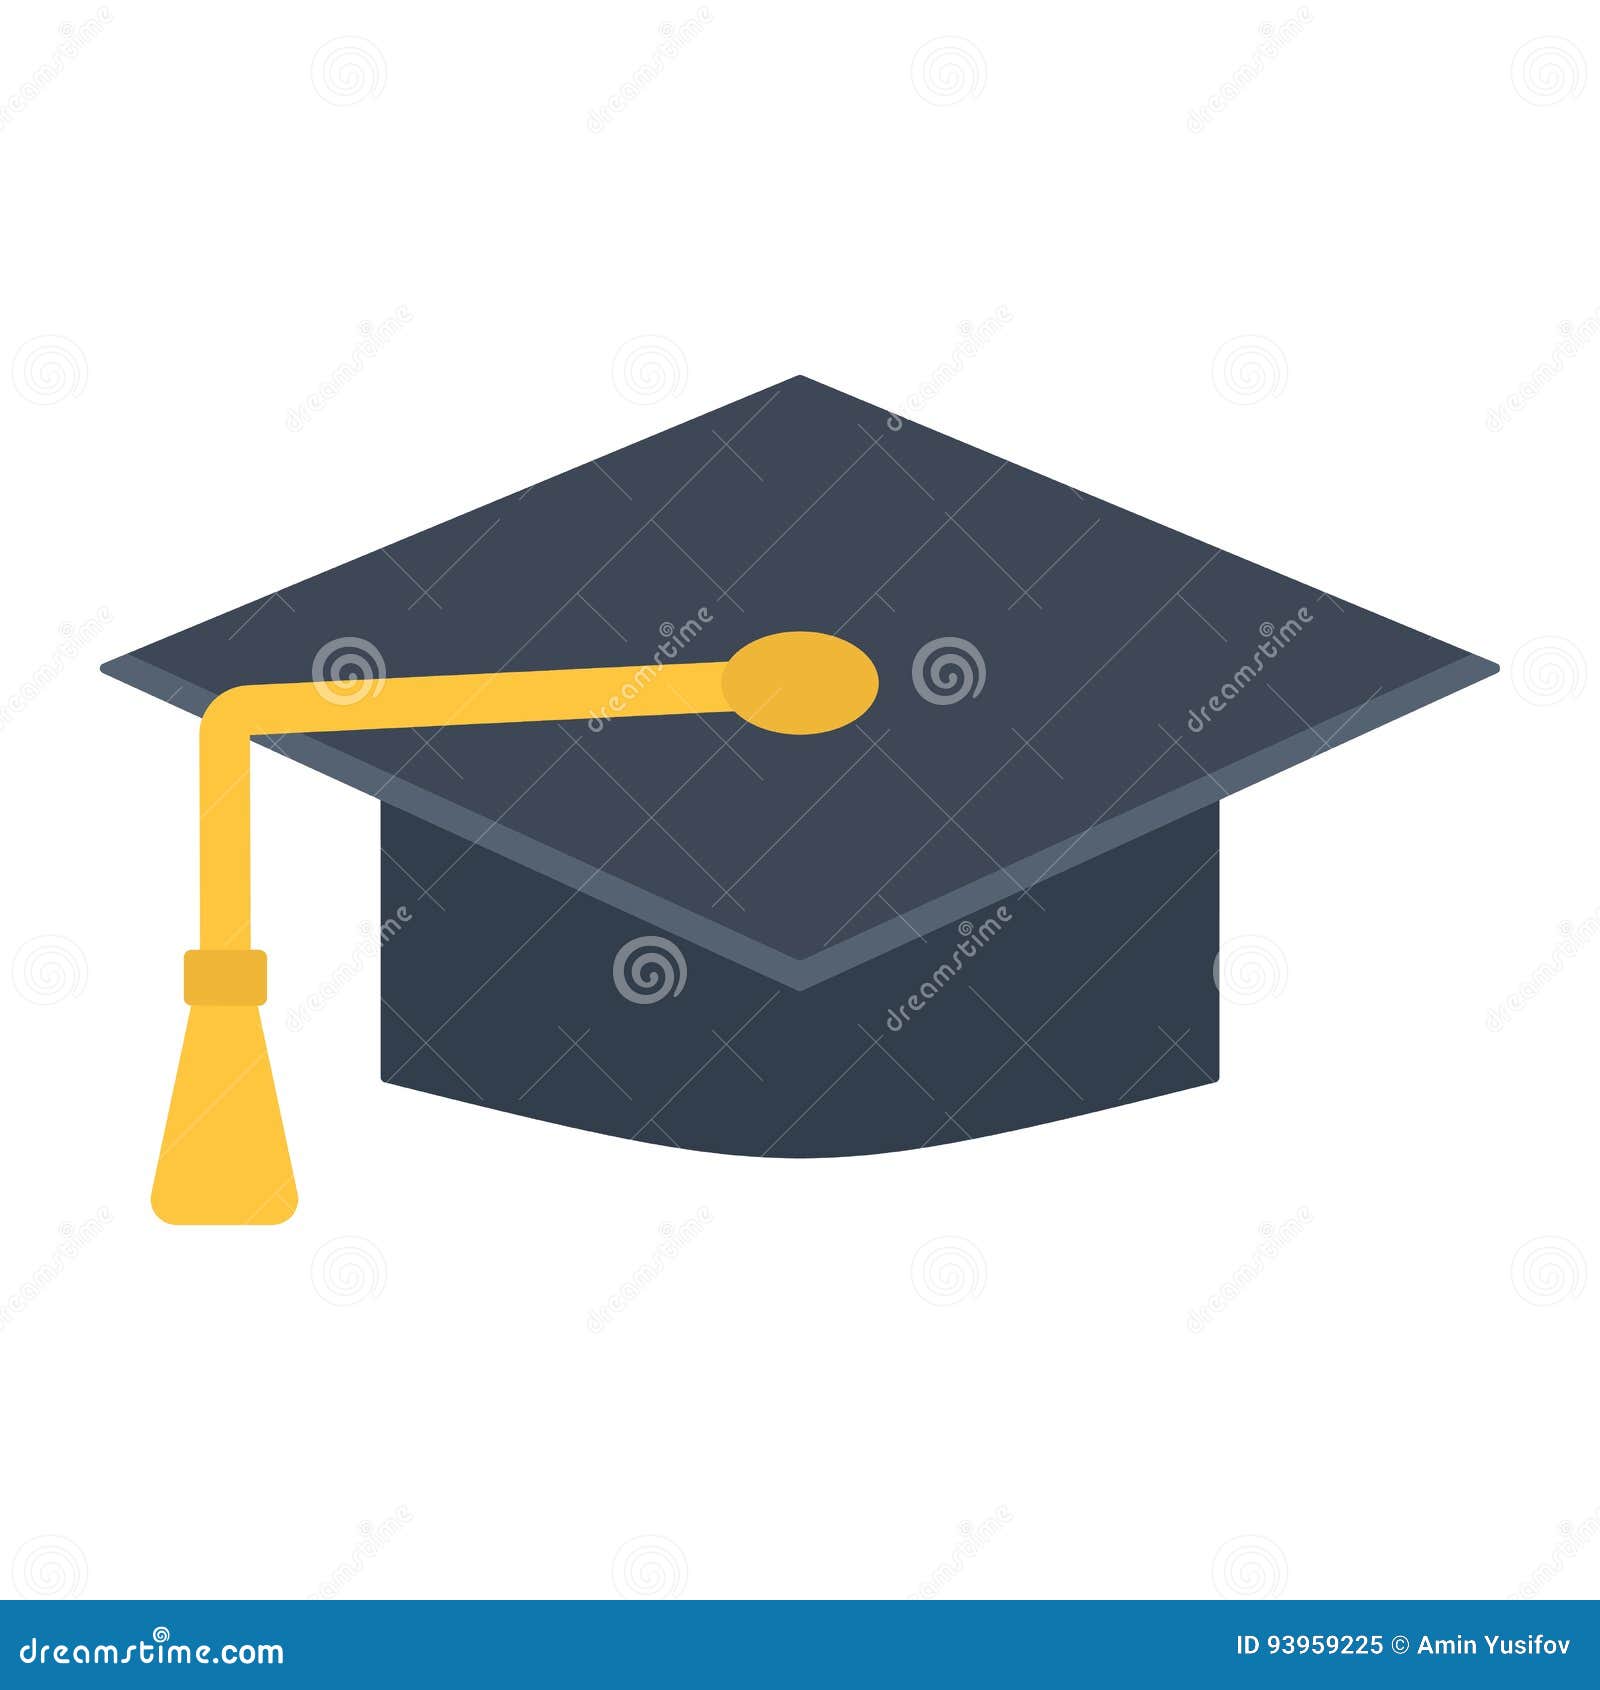 Graduation Cap Flat Icon, Education and Knowledge Stock Vector ...